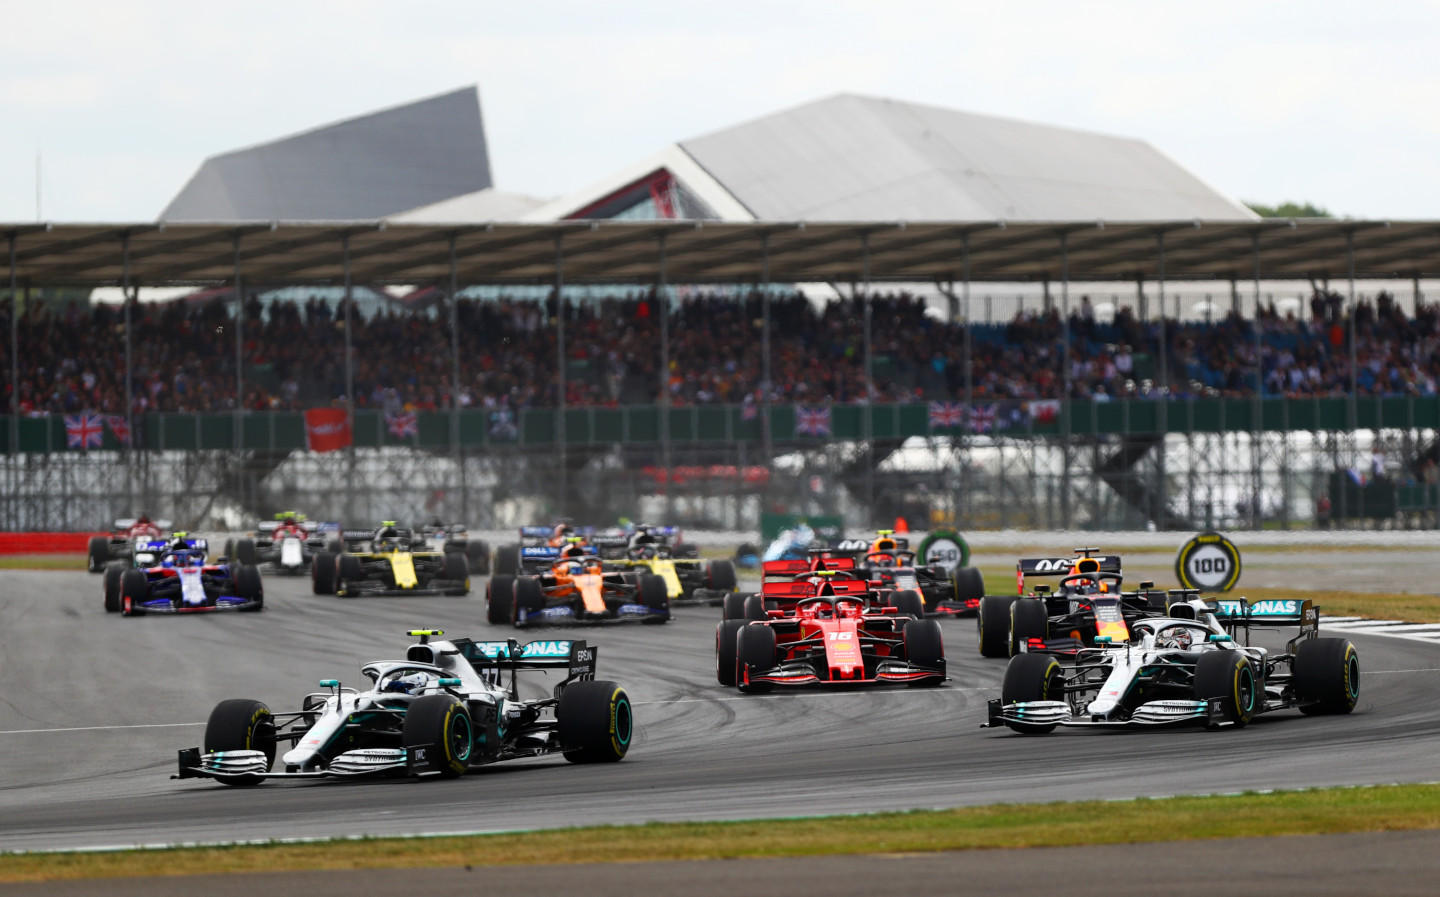 British Grand Prix at Silverstone could be held with full crowd